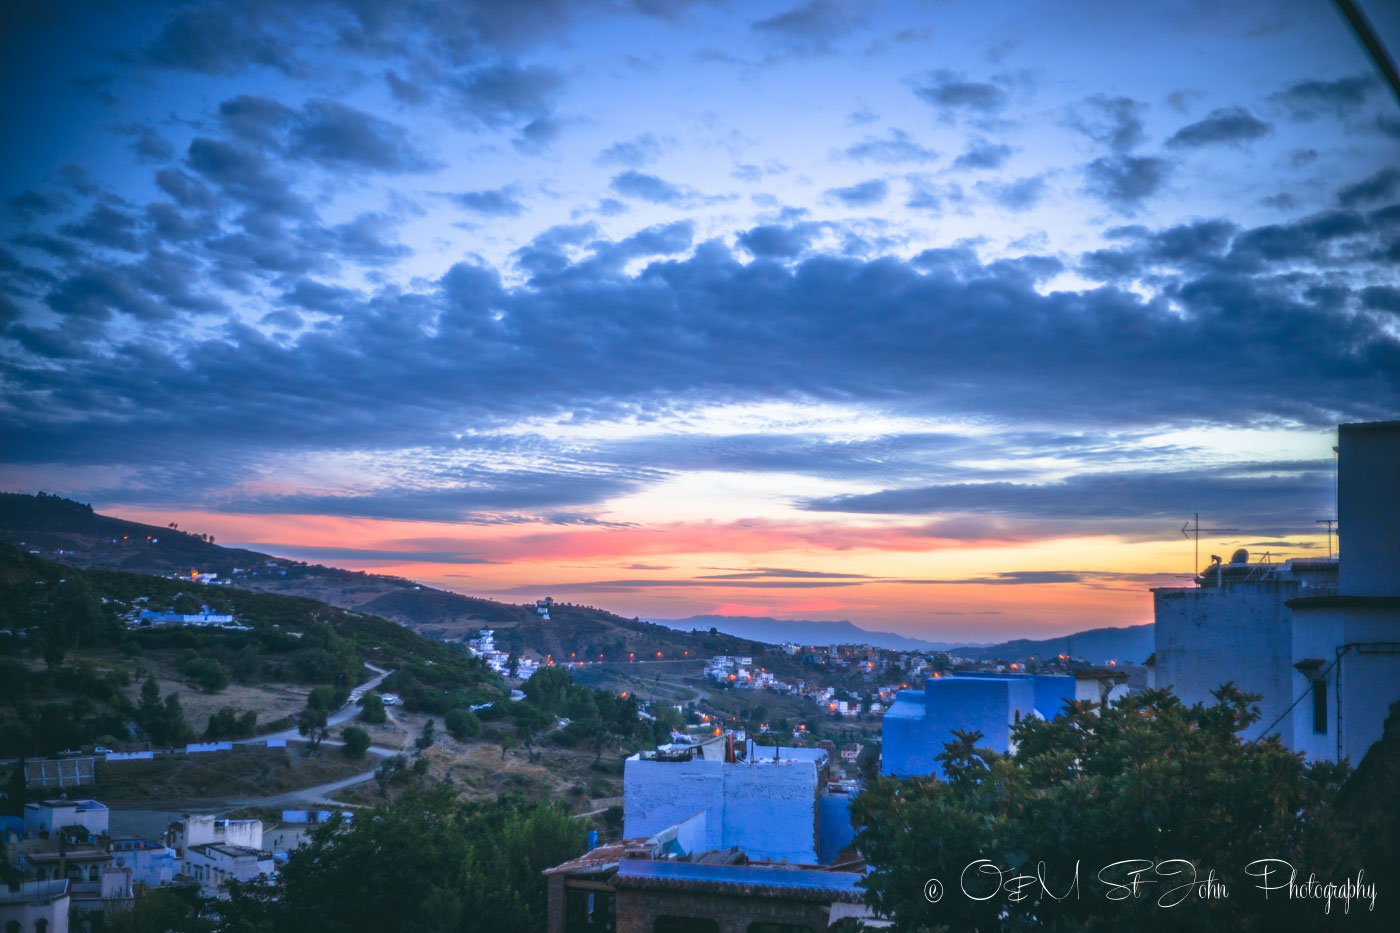 Sunset over the blue city of Chefchaouen. Morocco